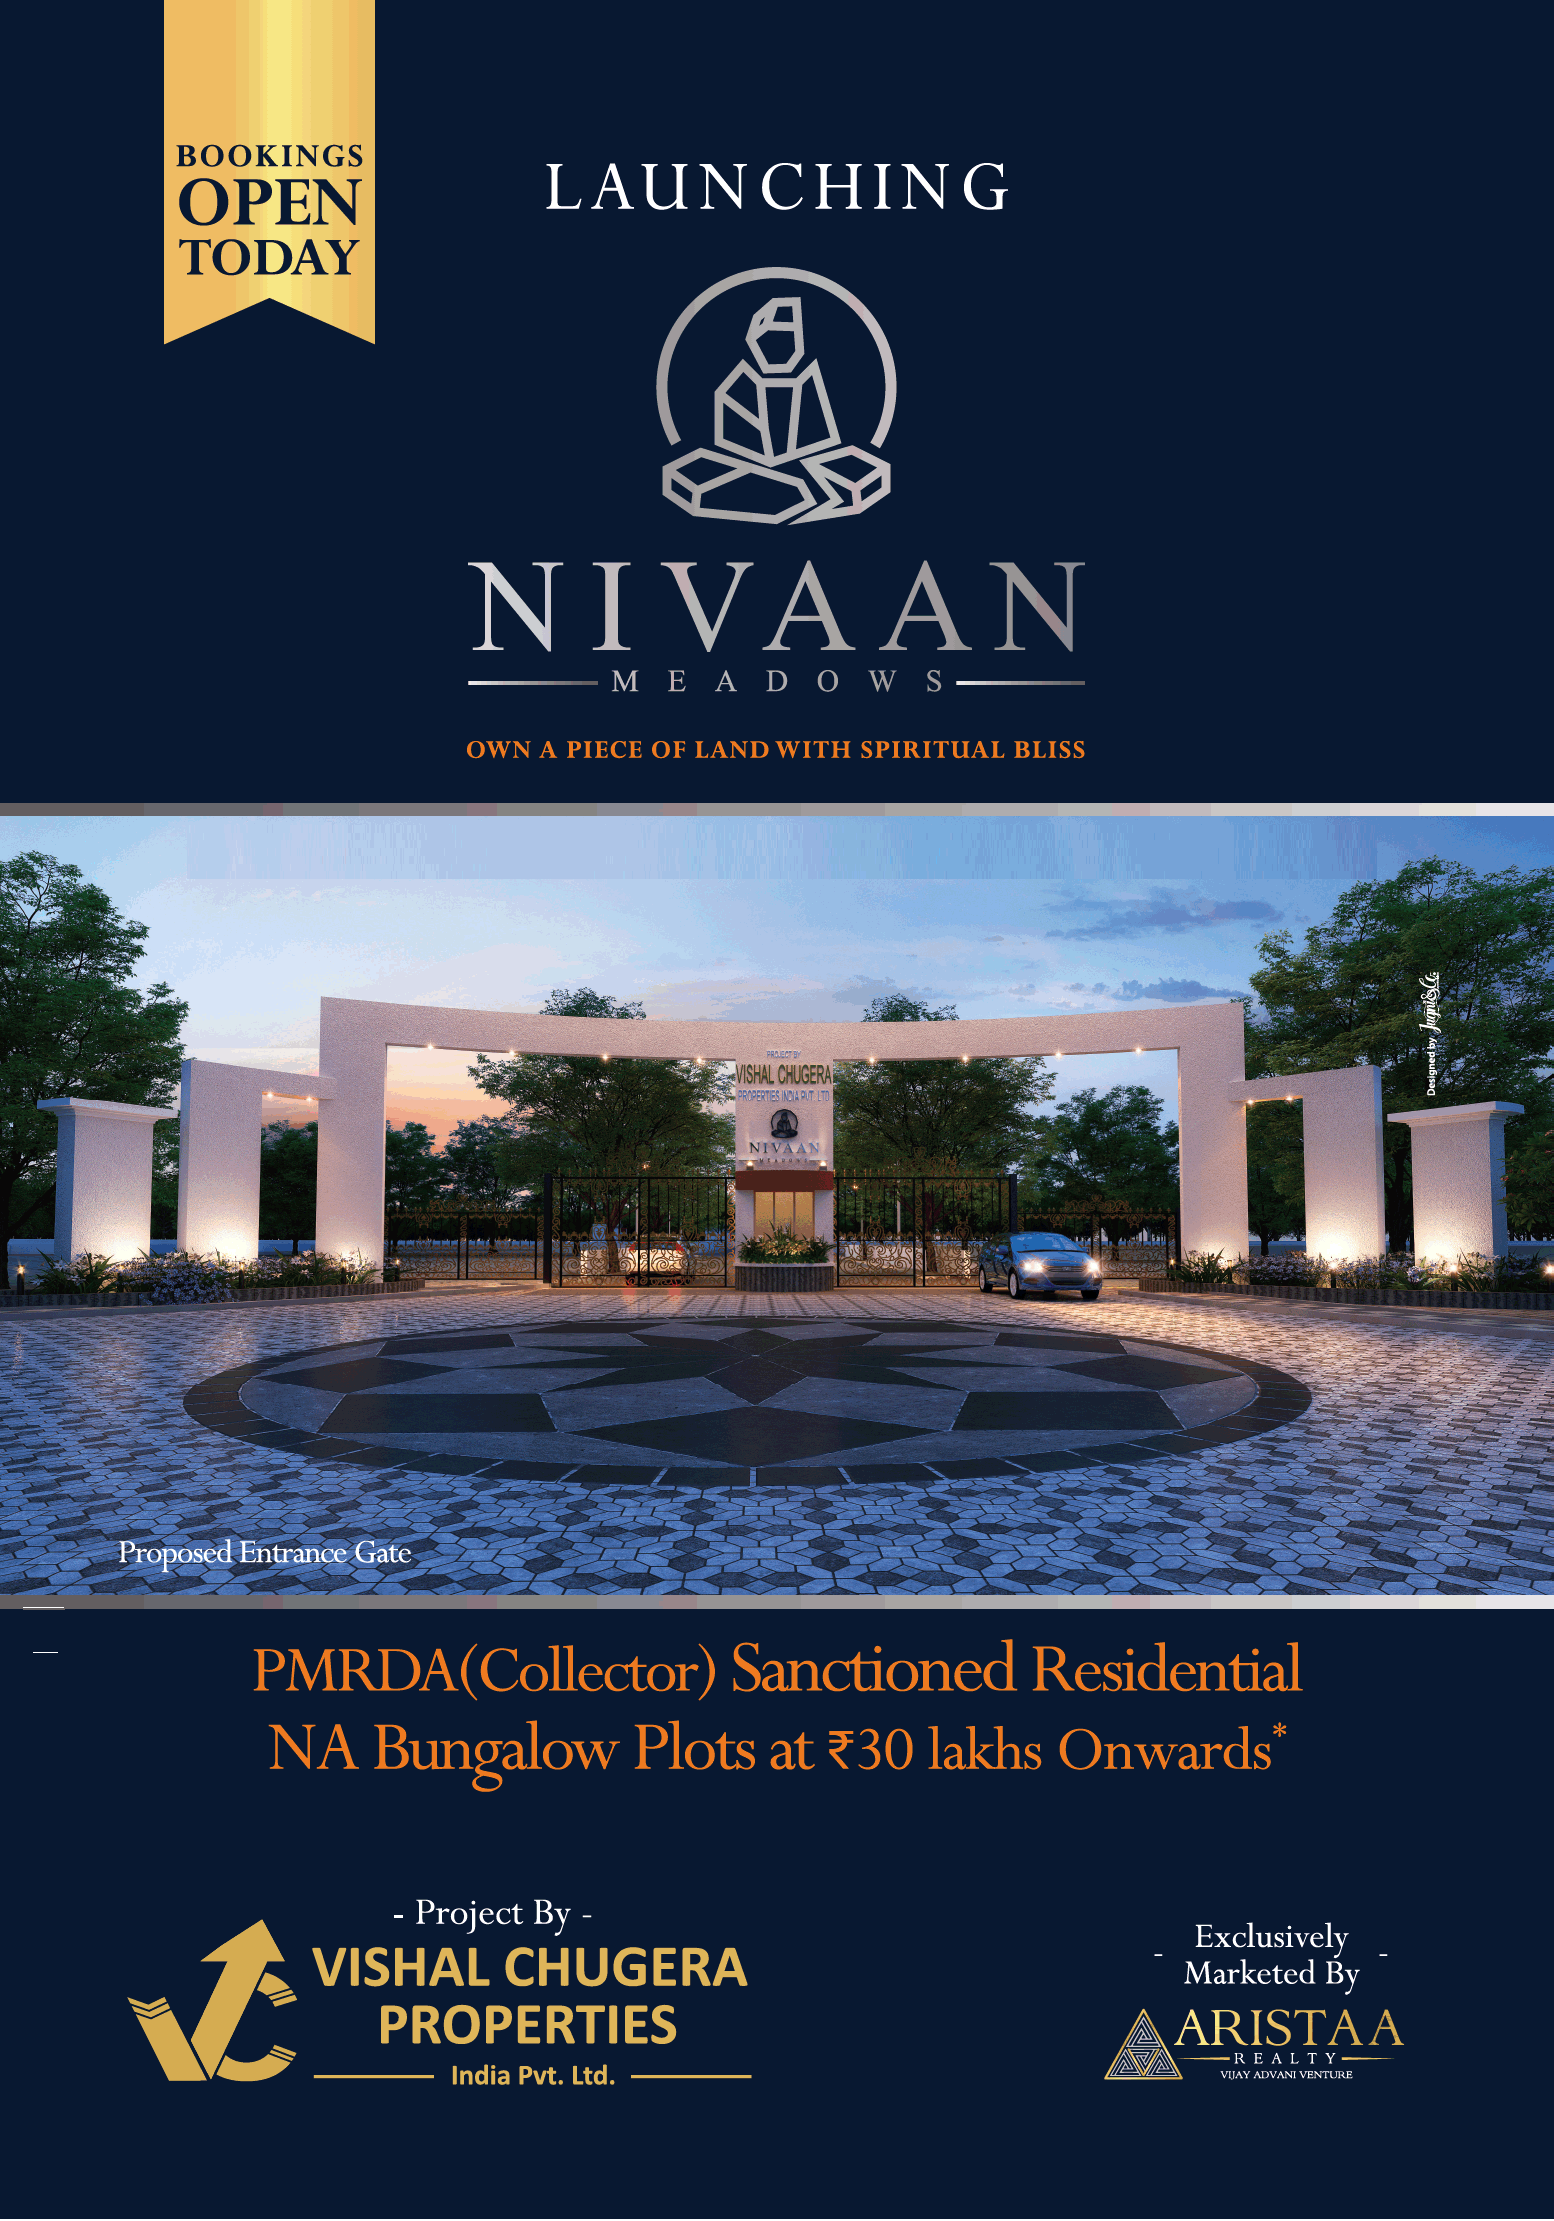 Launching Bungalow Plots at Rs. 30 lakhs at Nivaan Meadows in Wagholi, Pune Update